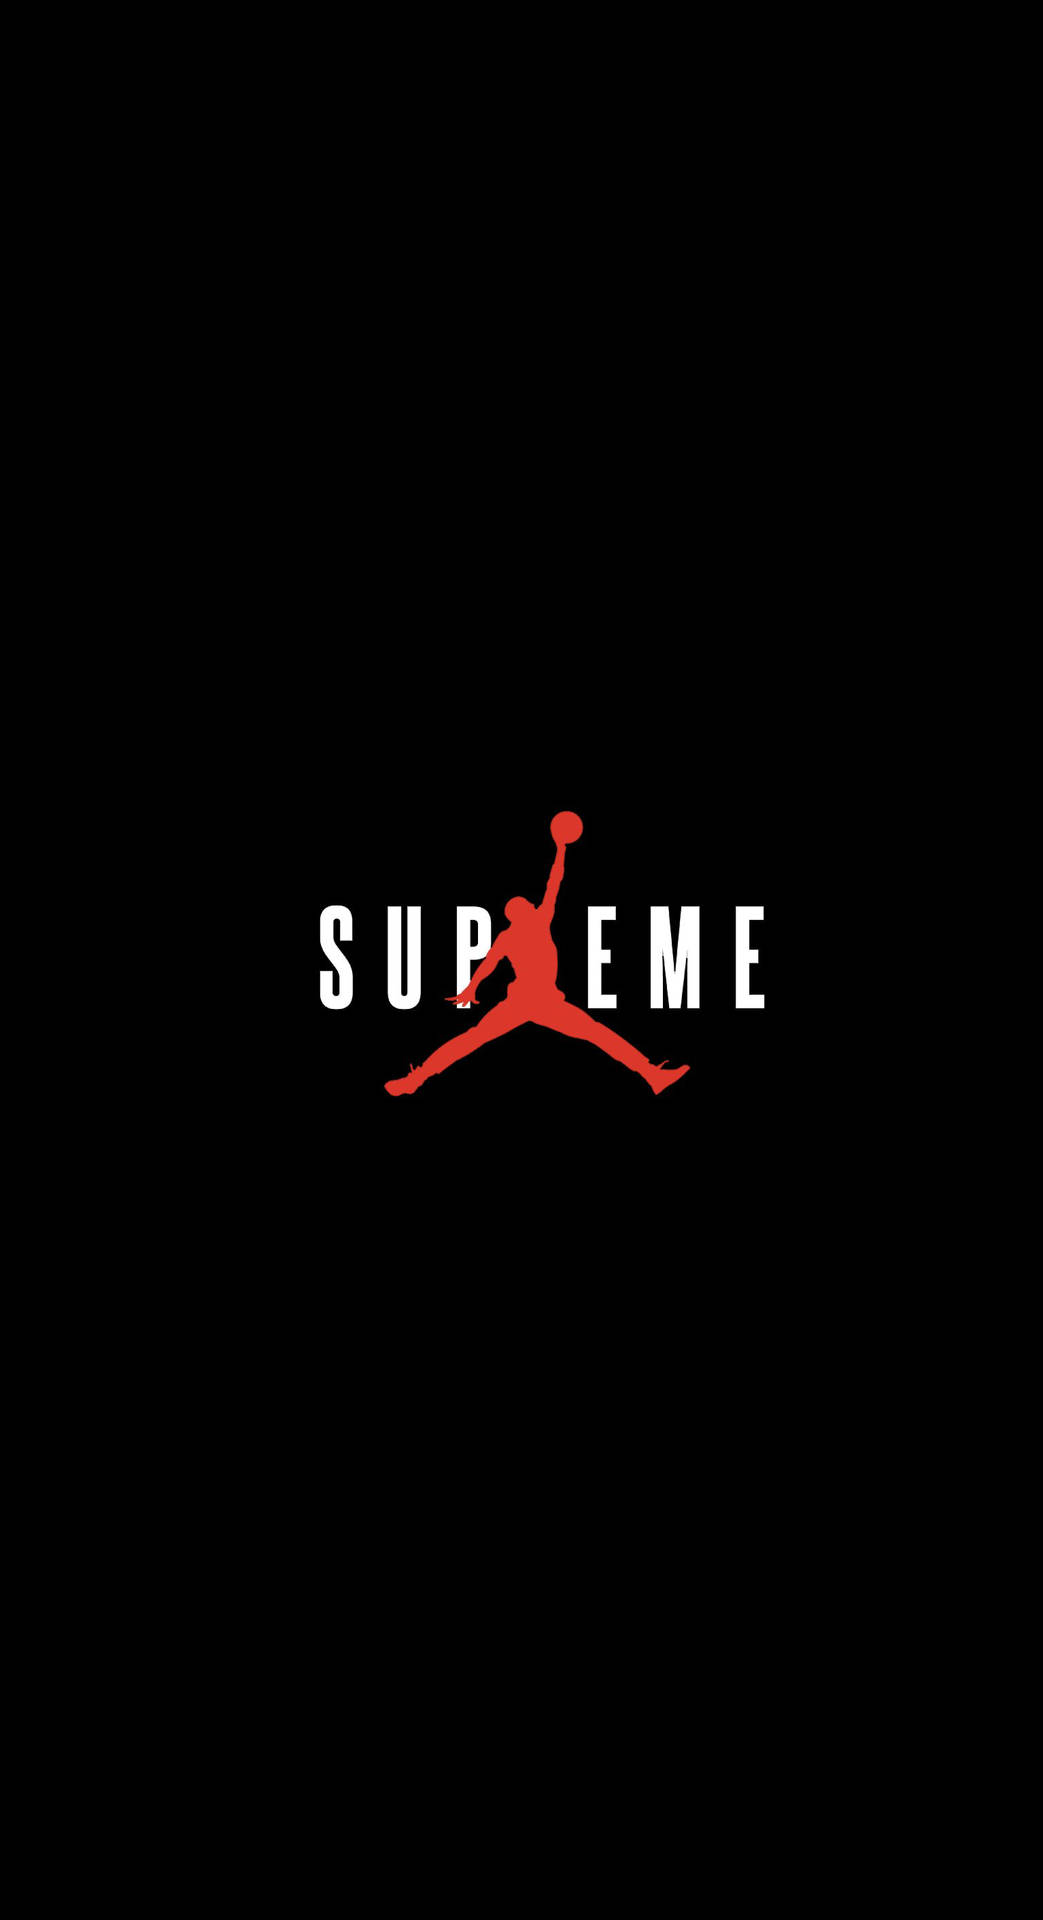 Supreme 1534X2824 Wallpaper and Background Image